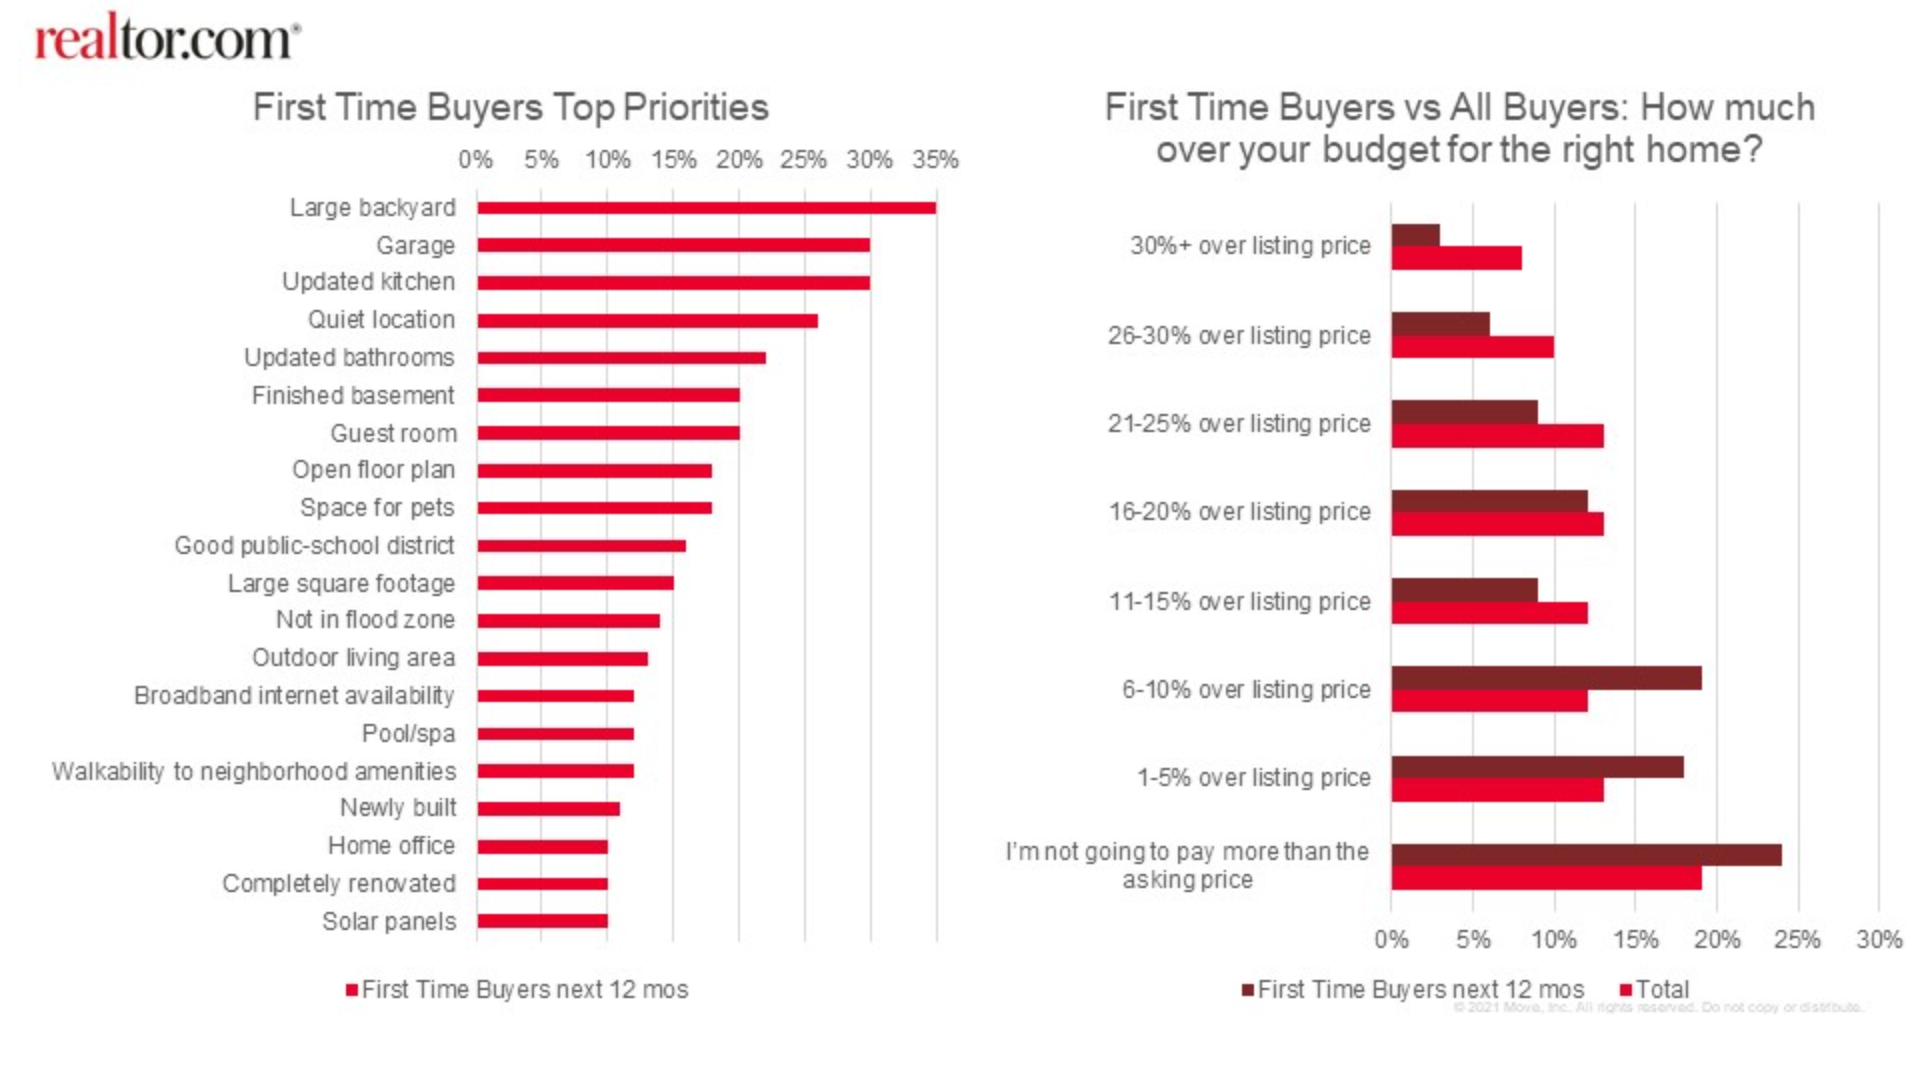 Two bar charts, one showing first time buyer priorities, the other showing how much over their budget first time buyers will go.